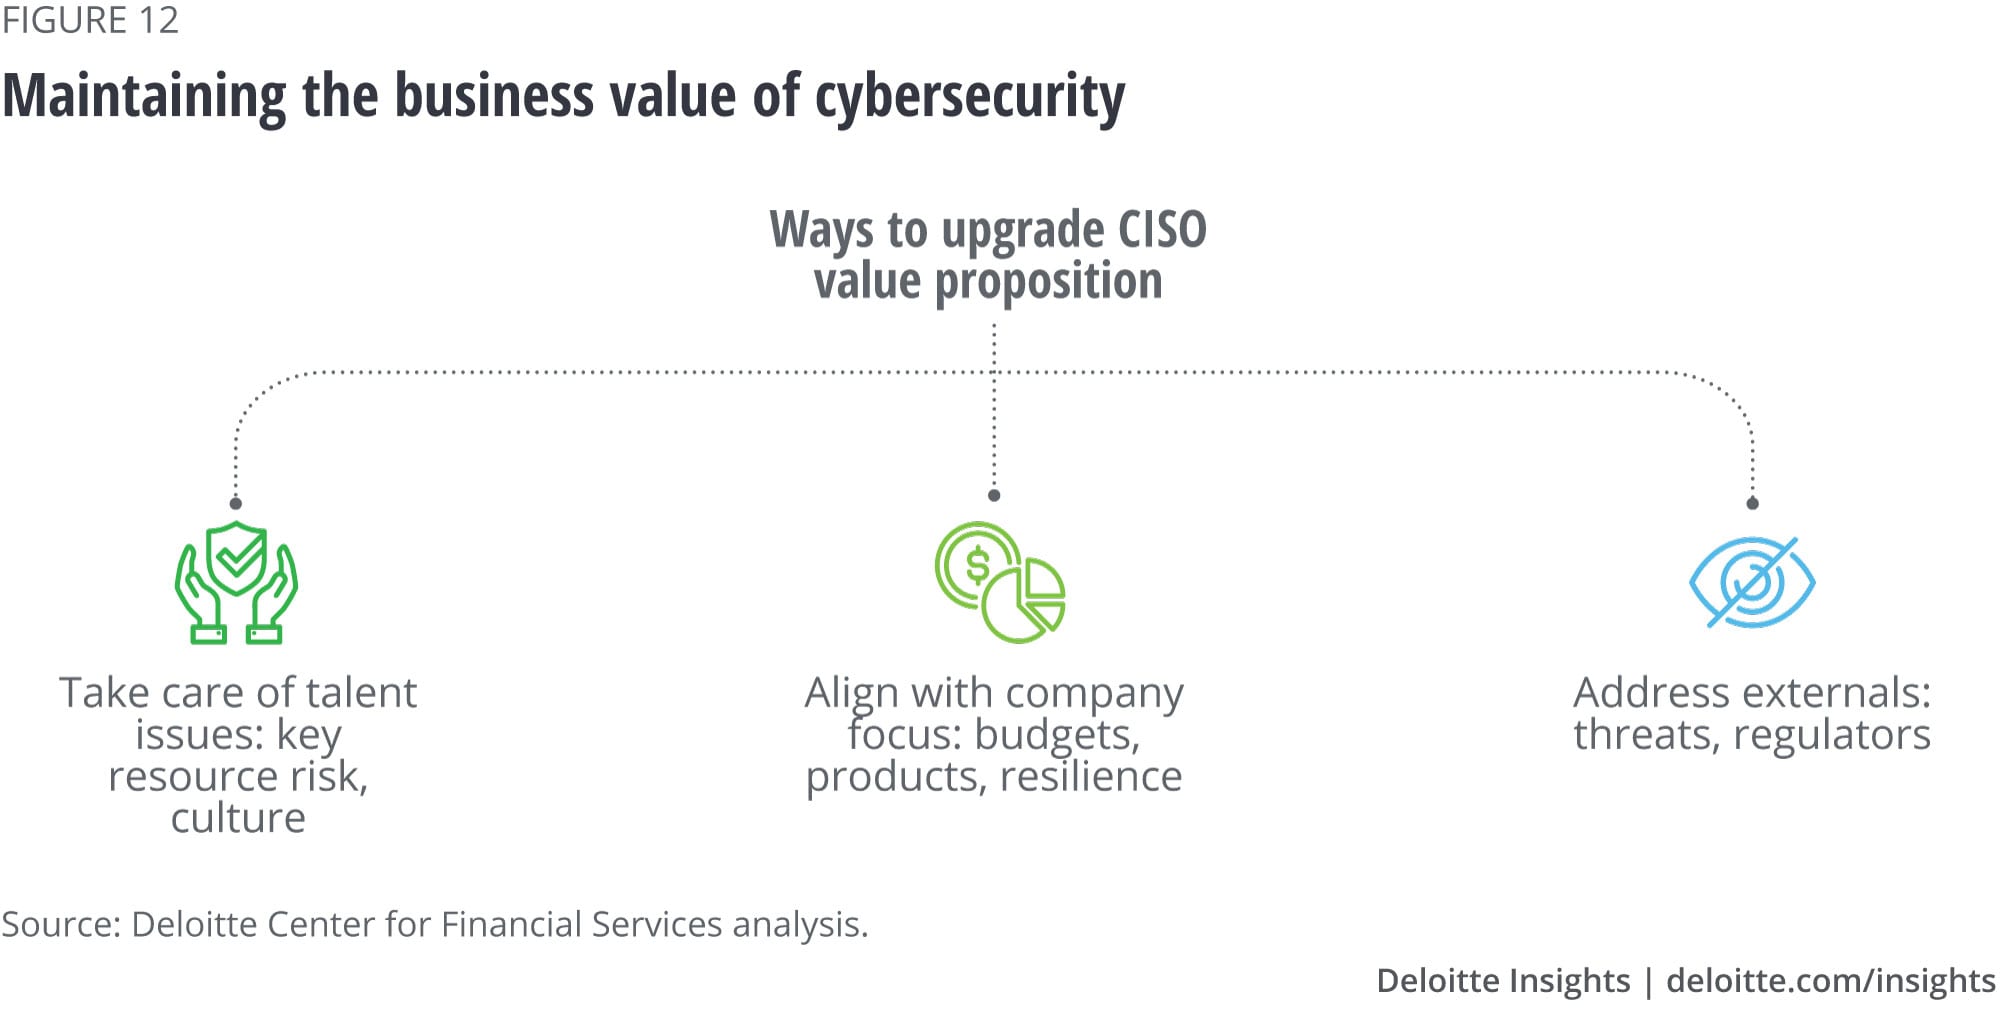 Maintain the business value of cybersecurity